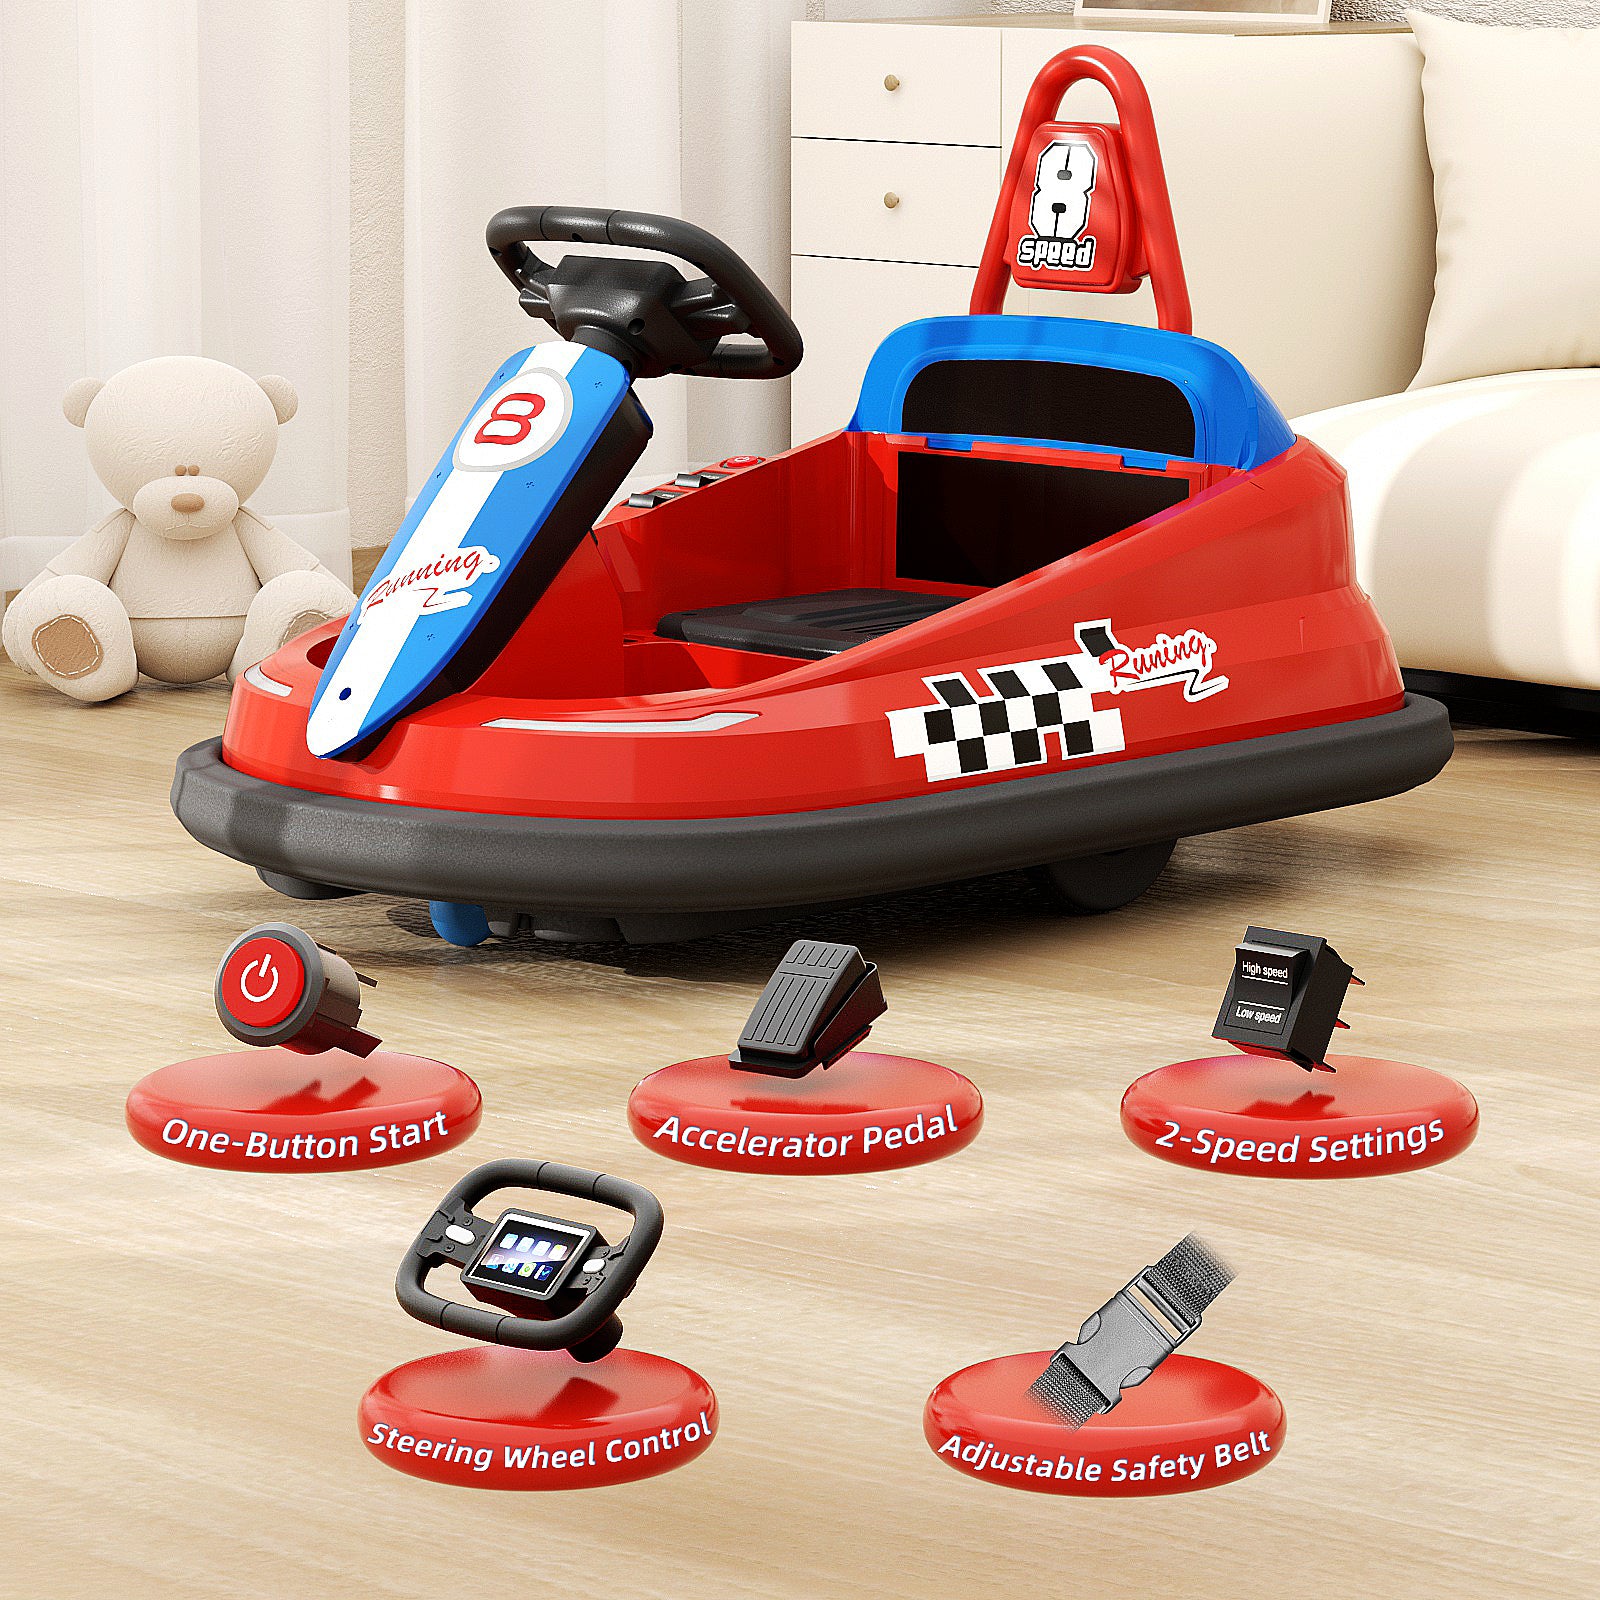 XJD 360° Spinning Toddlers Battery Powered Electric Bumper Cars for Kids Age 1.5+, Red